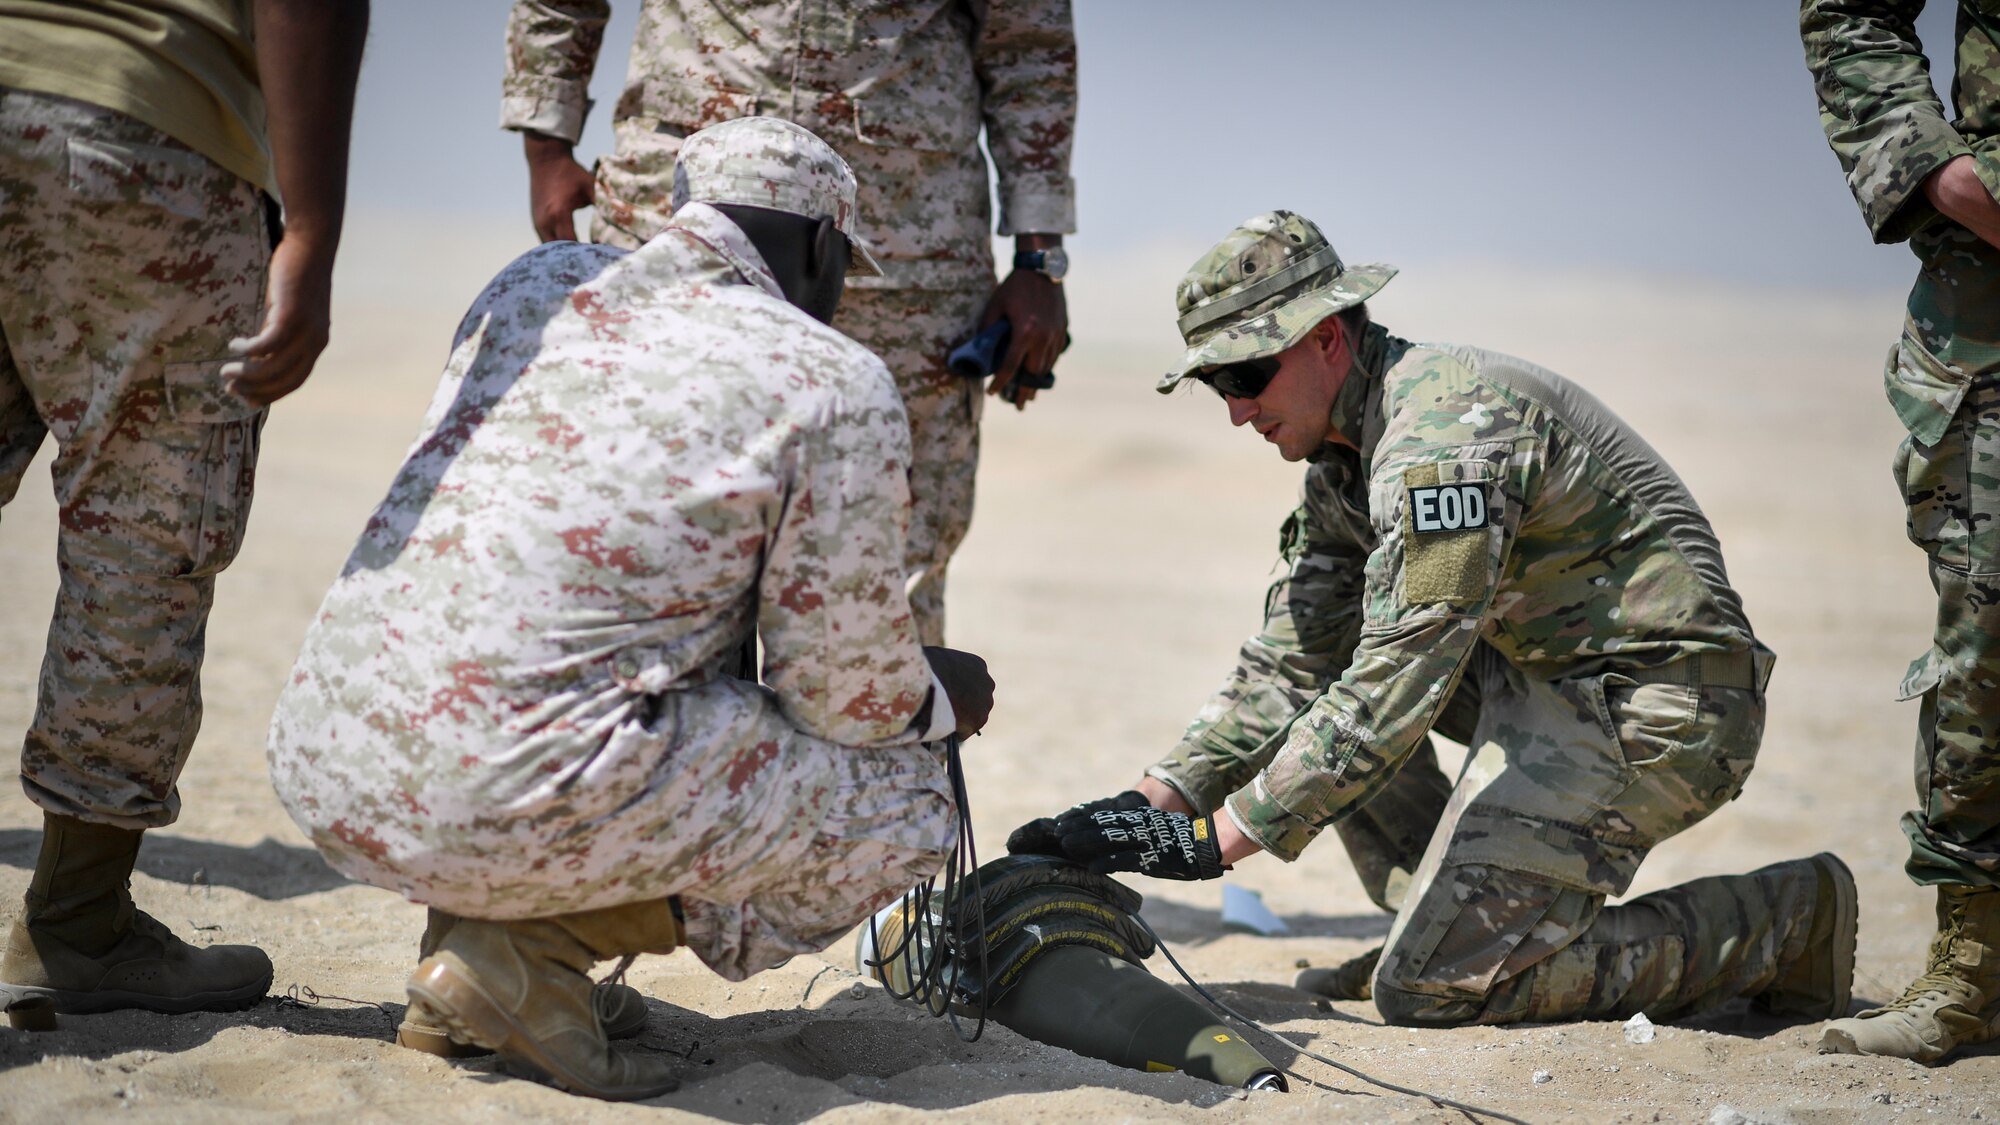 U.S. Army Sgt. 1st Class Jesse Harris, 744th Ordnance Company operations sergeant, places C-4 high explosives on to a 155MM insensitive high explosive round before a munitions disposal training at the Udari Range, Kuwait, Sept. 30, 2019. C-4’s high cutting ability when detonated makes it the ideal explosive to use in the disposal or controlled detonations of insensitive high explosive rounds.